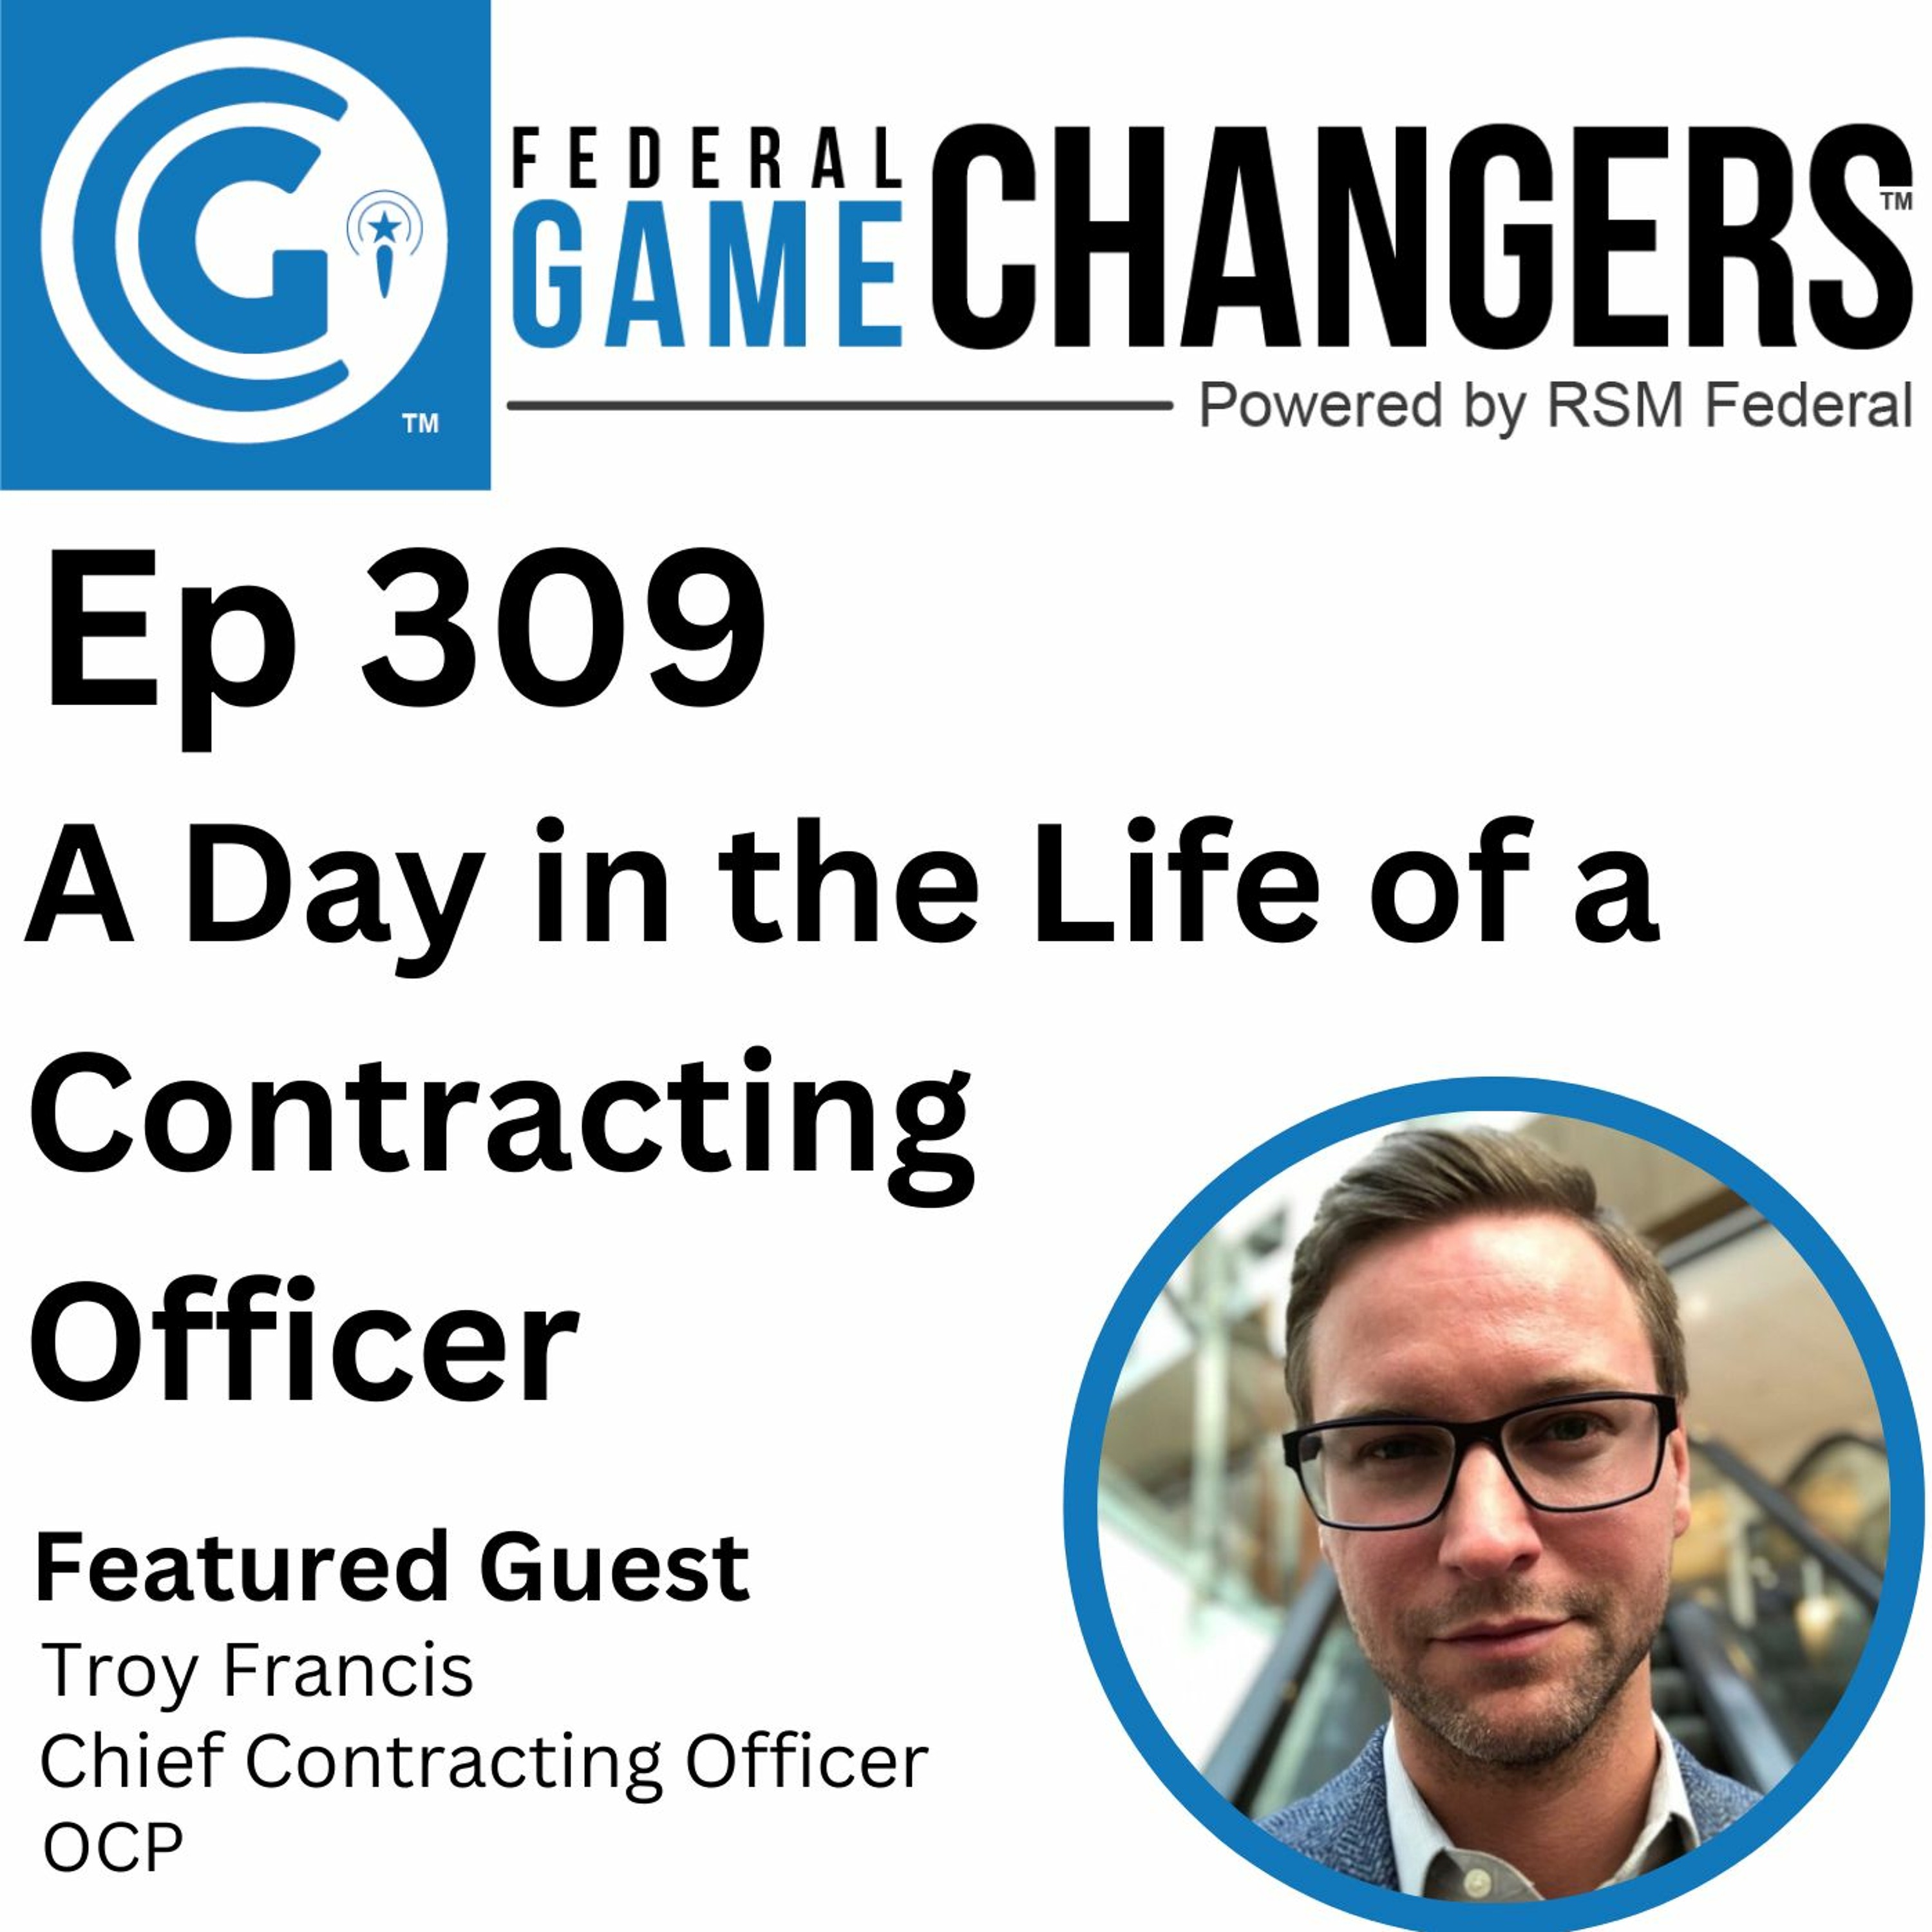 Ep 309: A Day in the Life of a Contracting Officer